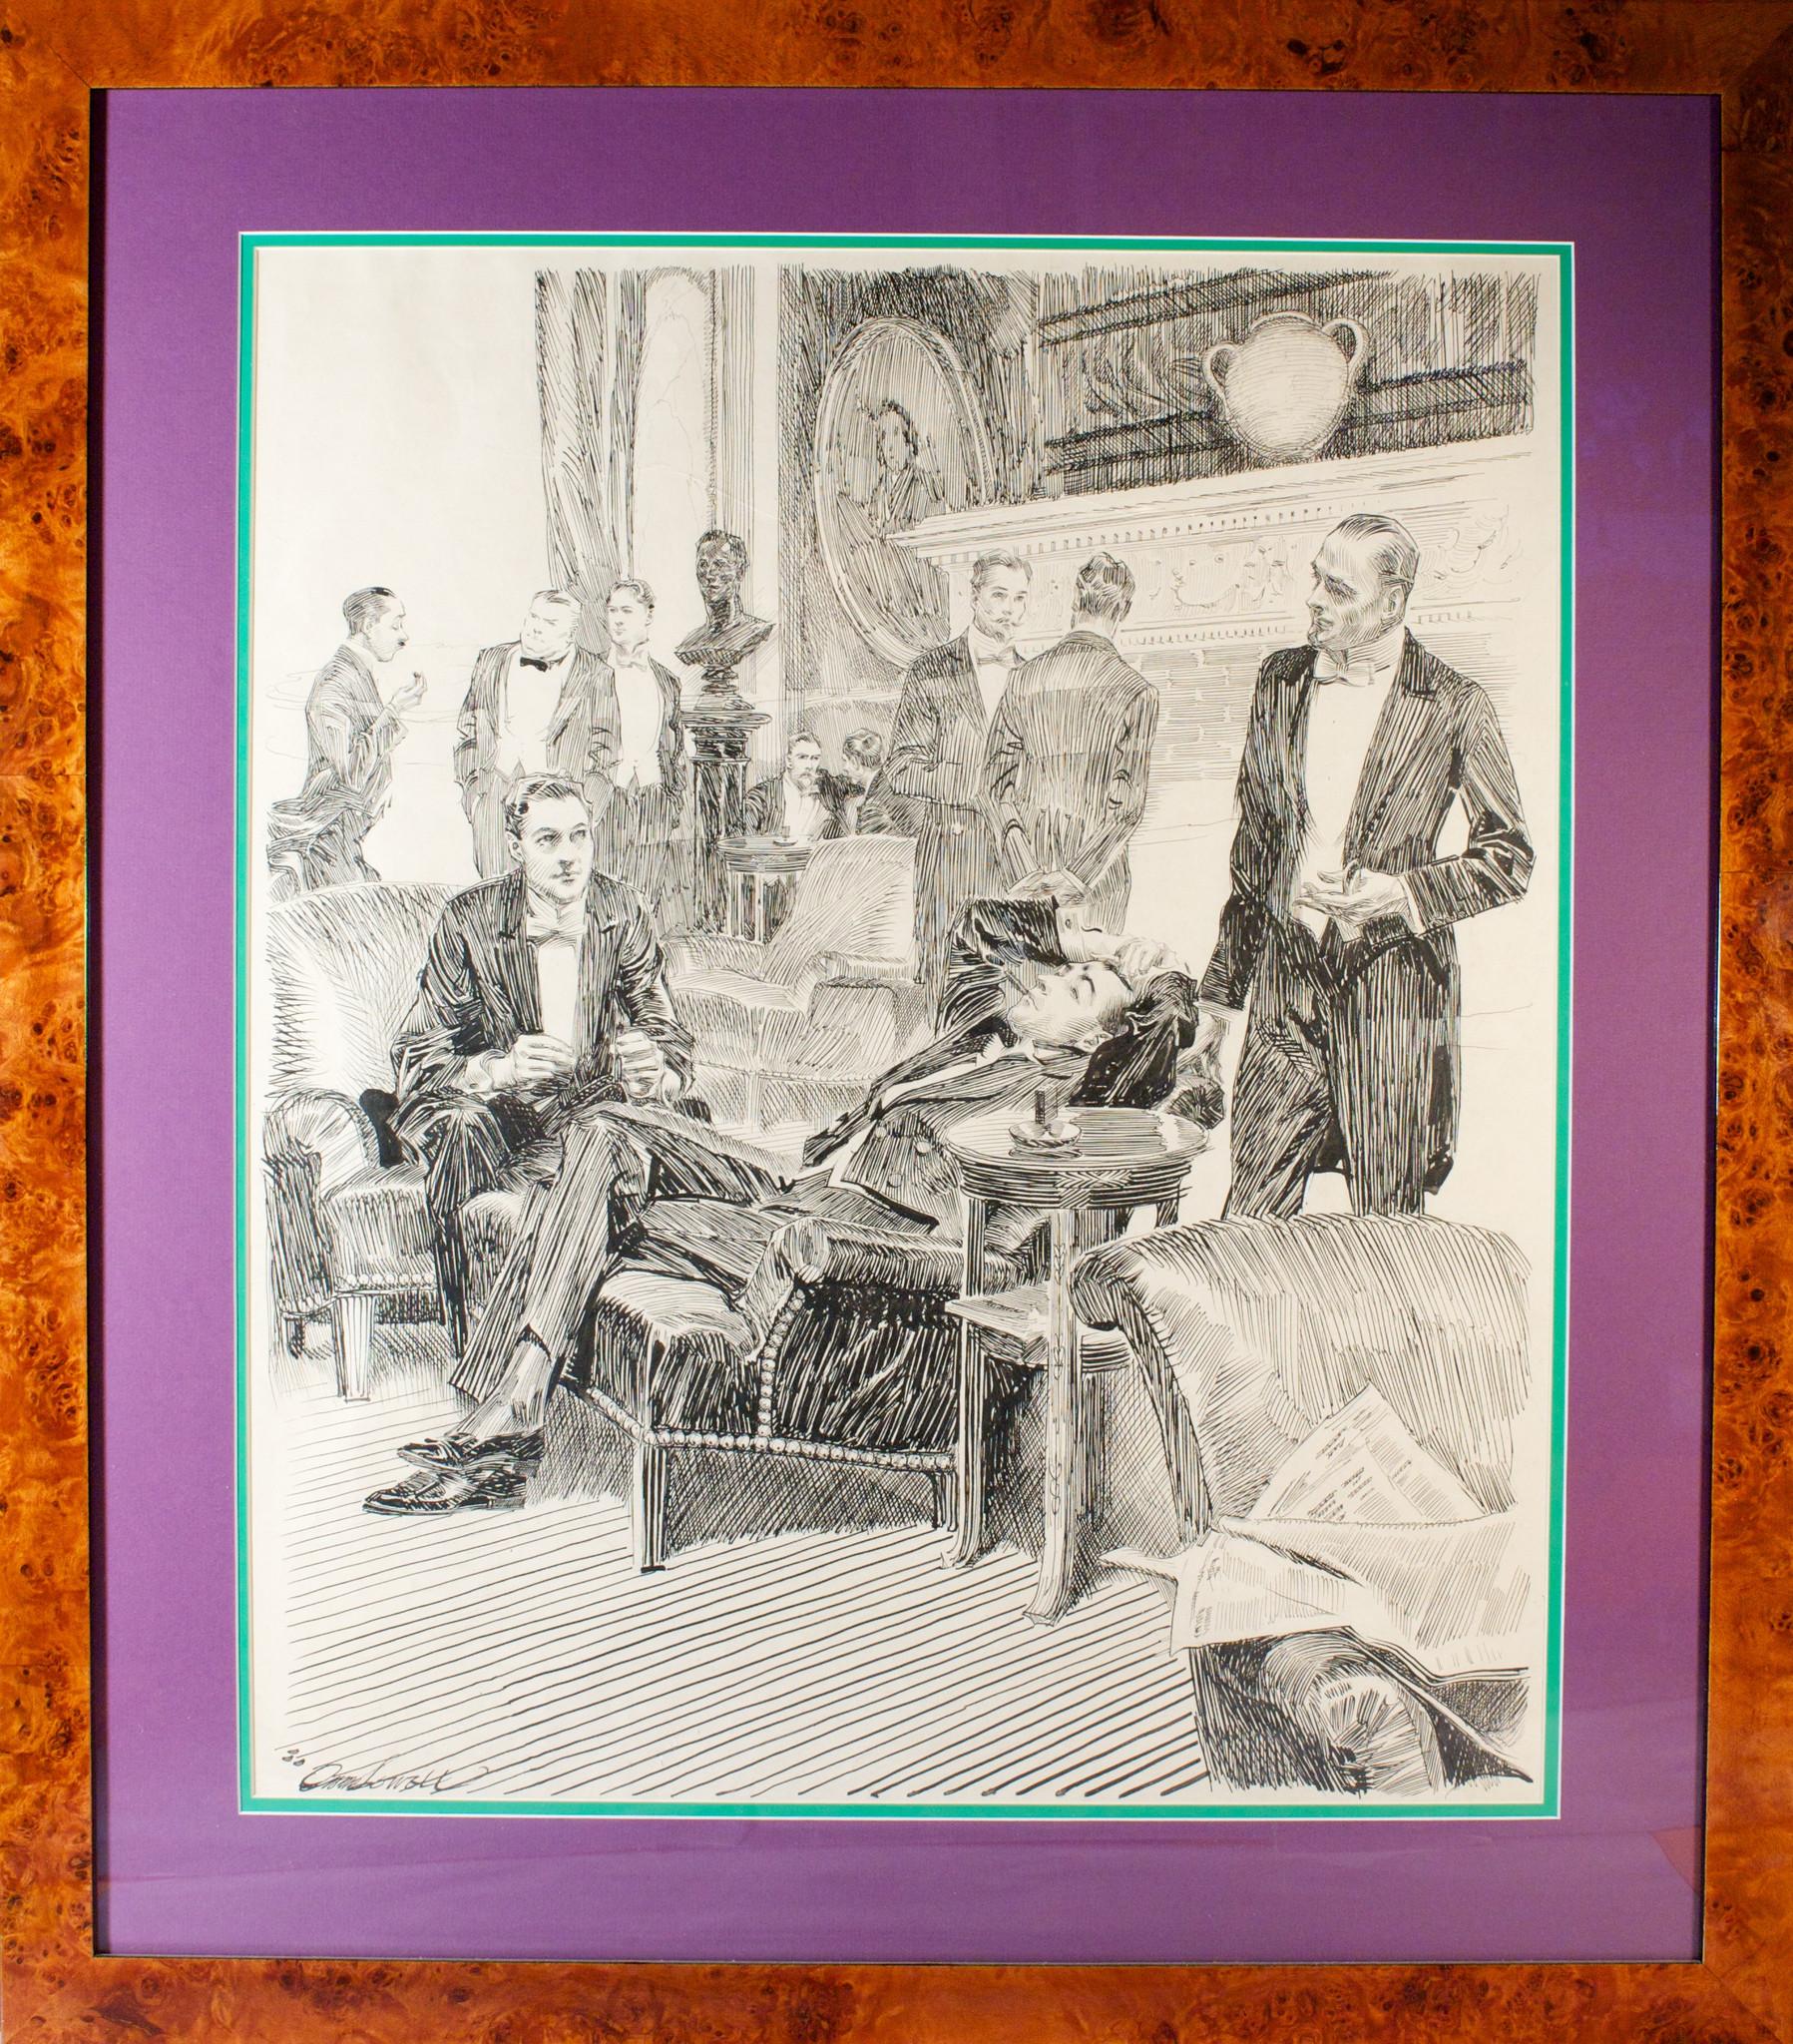 Gentlemen's Players' Club Pen & Ink Drawing by Orson B. Lowell - Art by Orson Byron Lowell